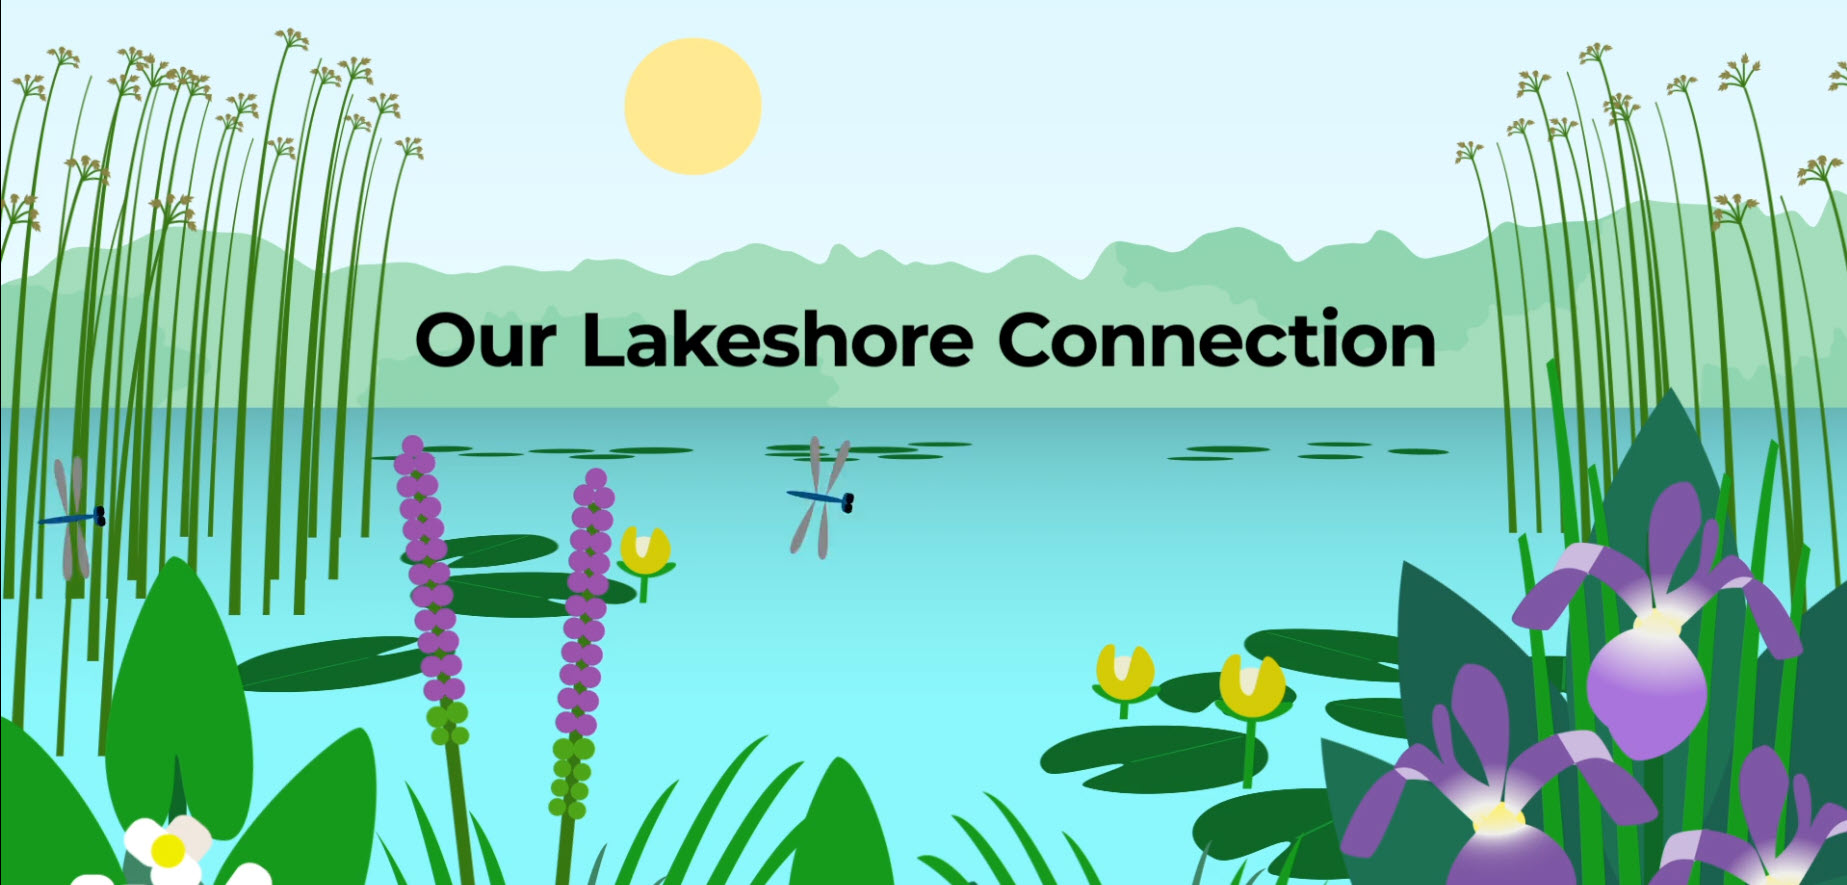 Our Lakeshore Connection CoverB.jpg